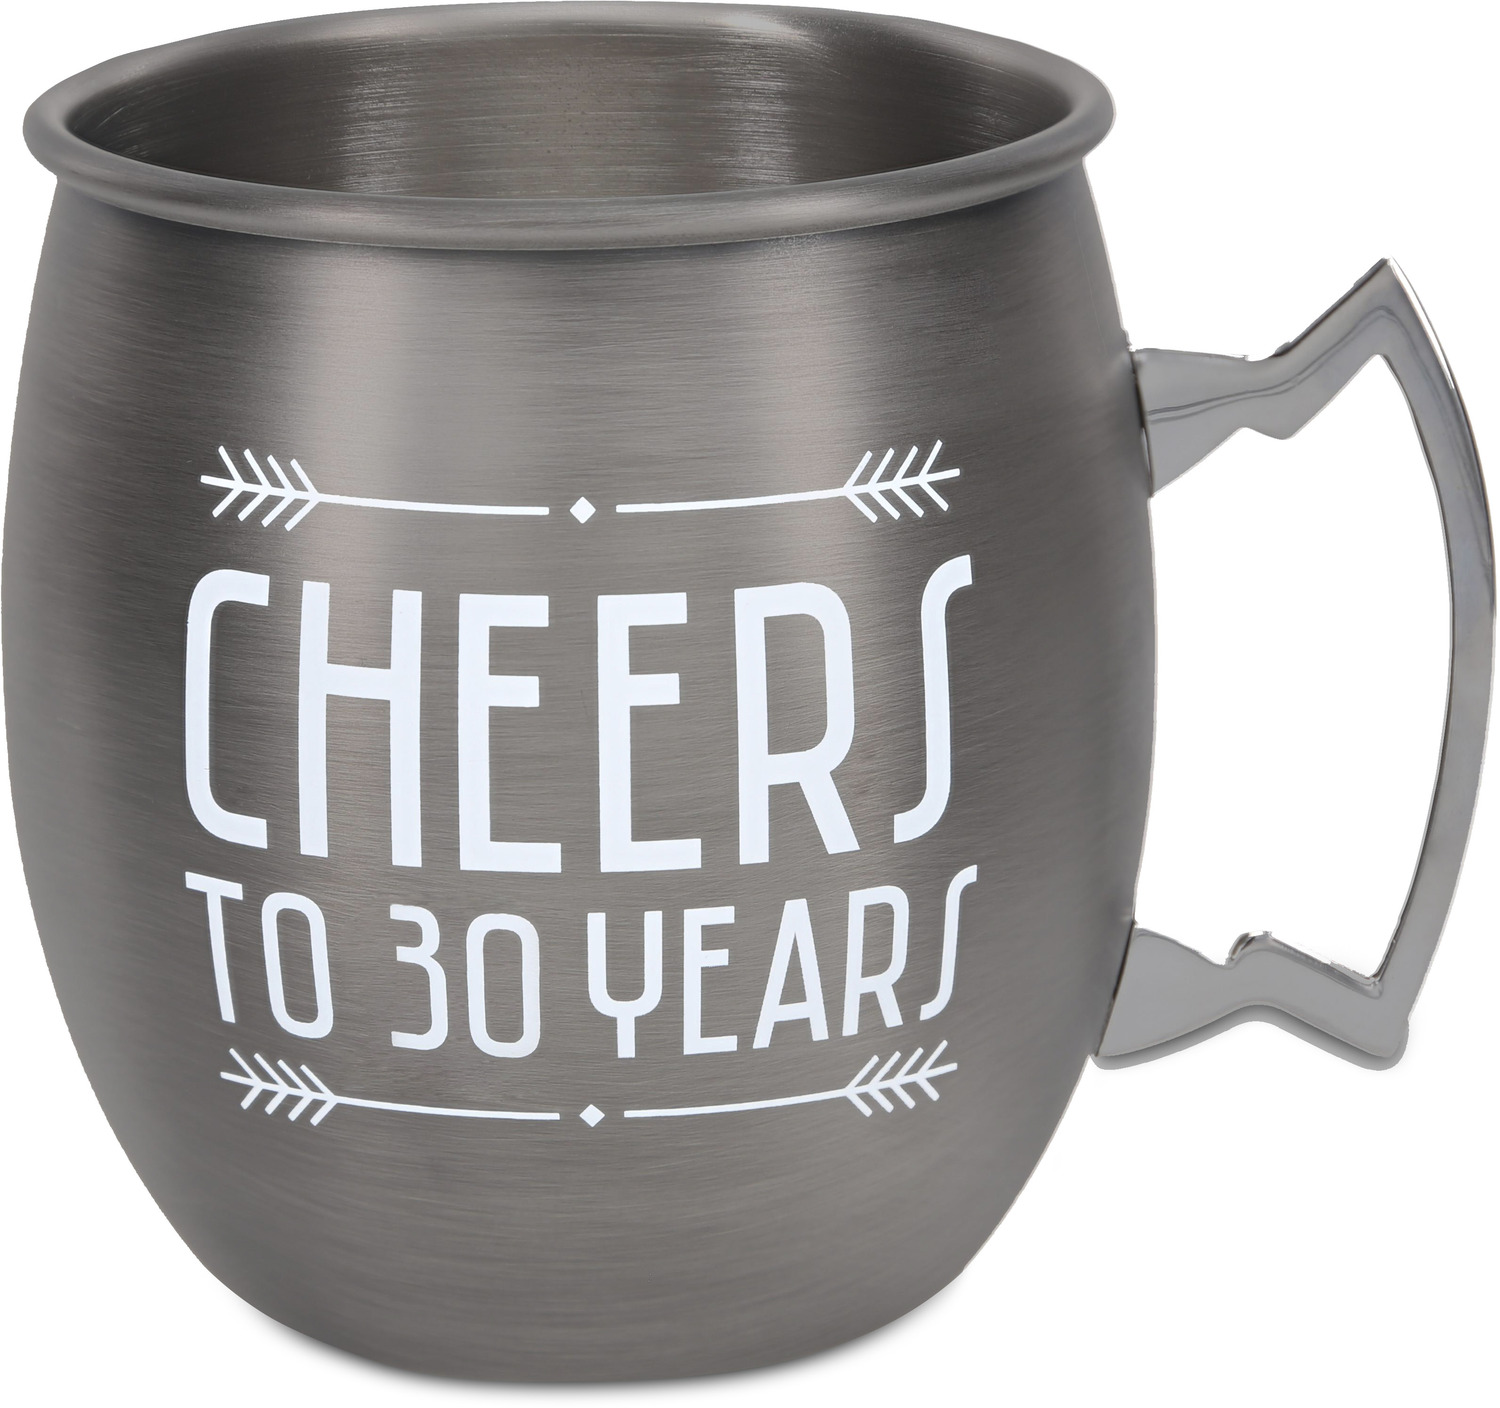 30 Years by Man Crafted - 30 Years - 20 oz Stainless Steel Moscow Mule